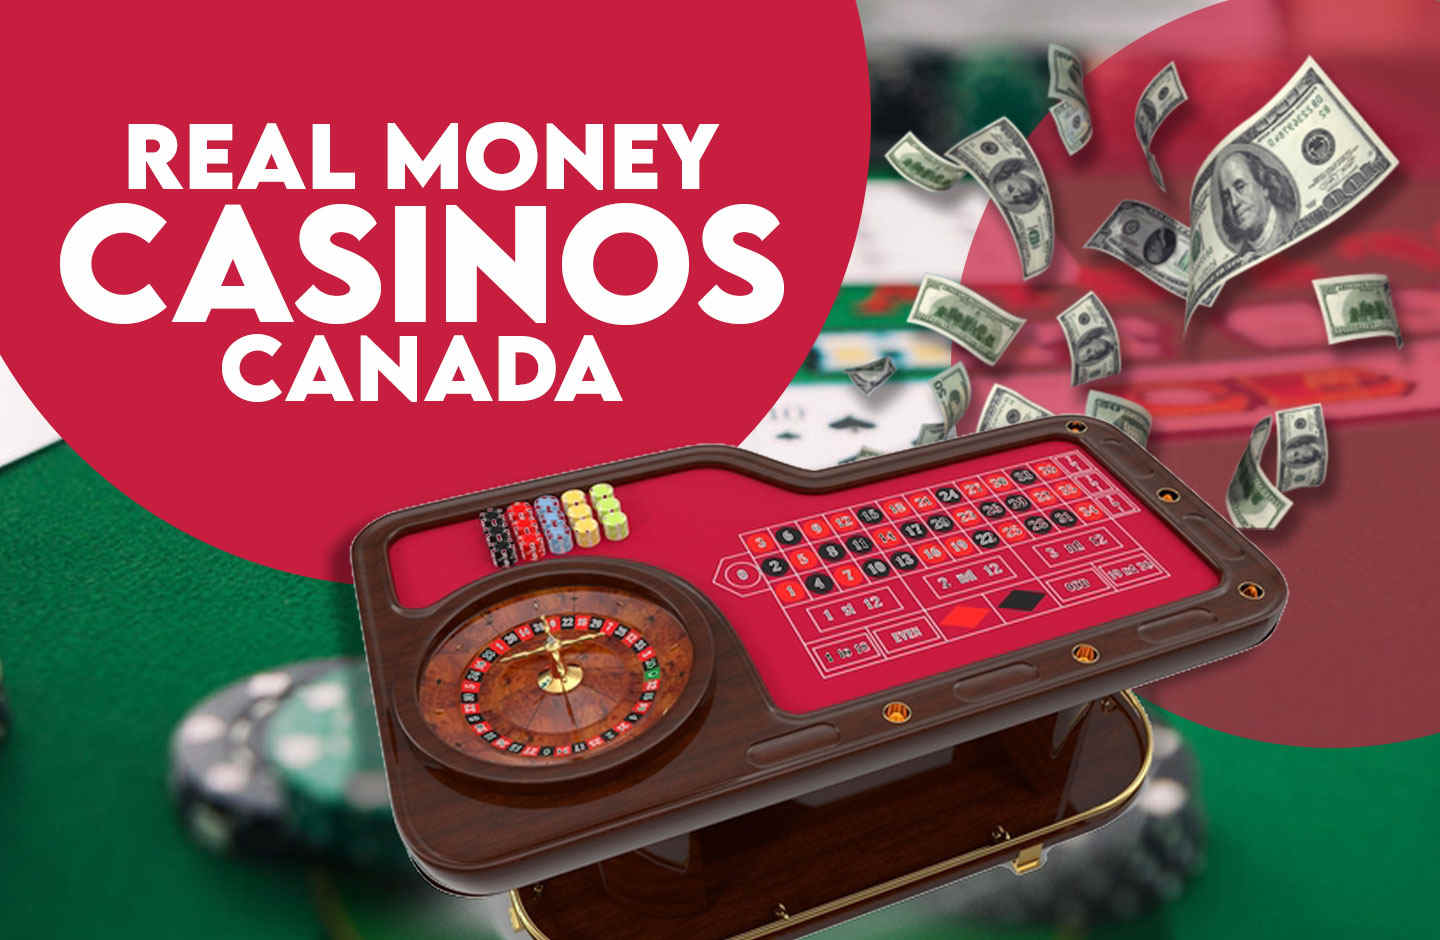 How To Make Your online casinos Look Amazing In 5 Days